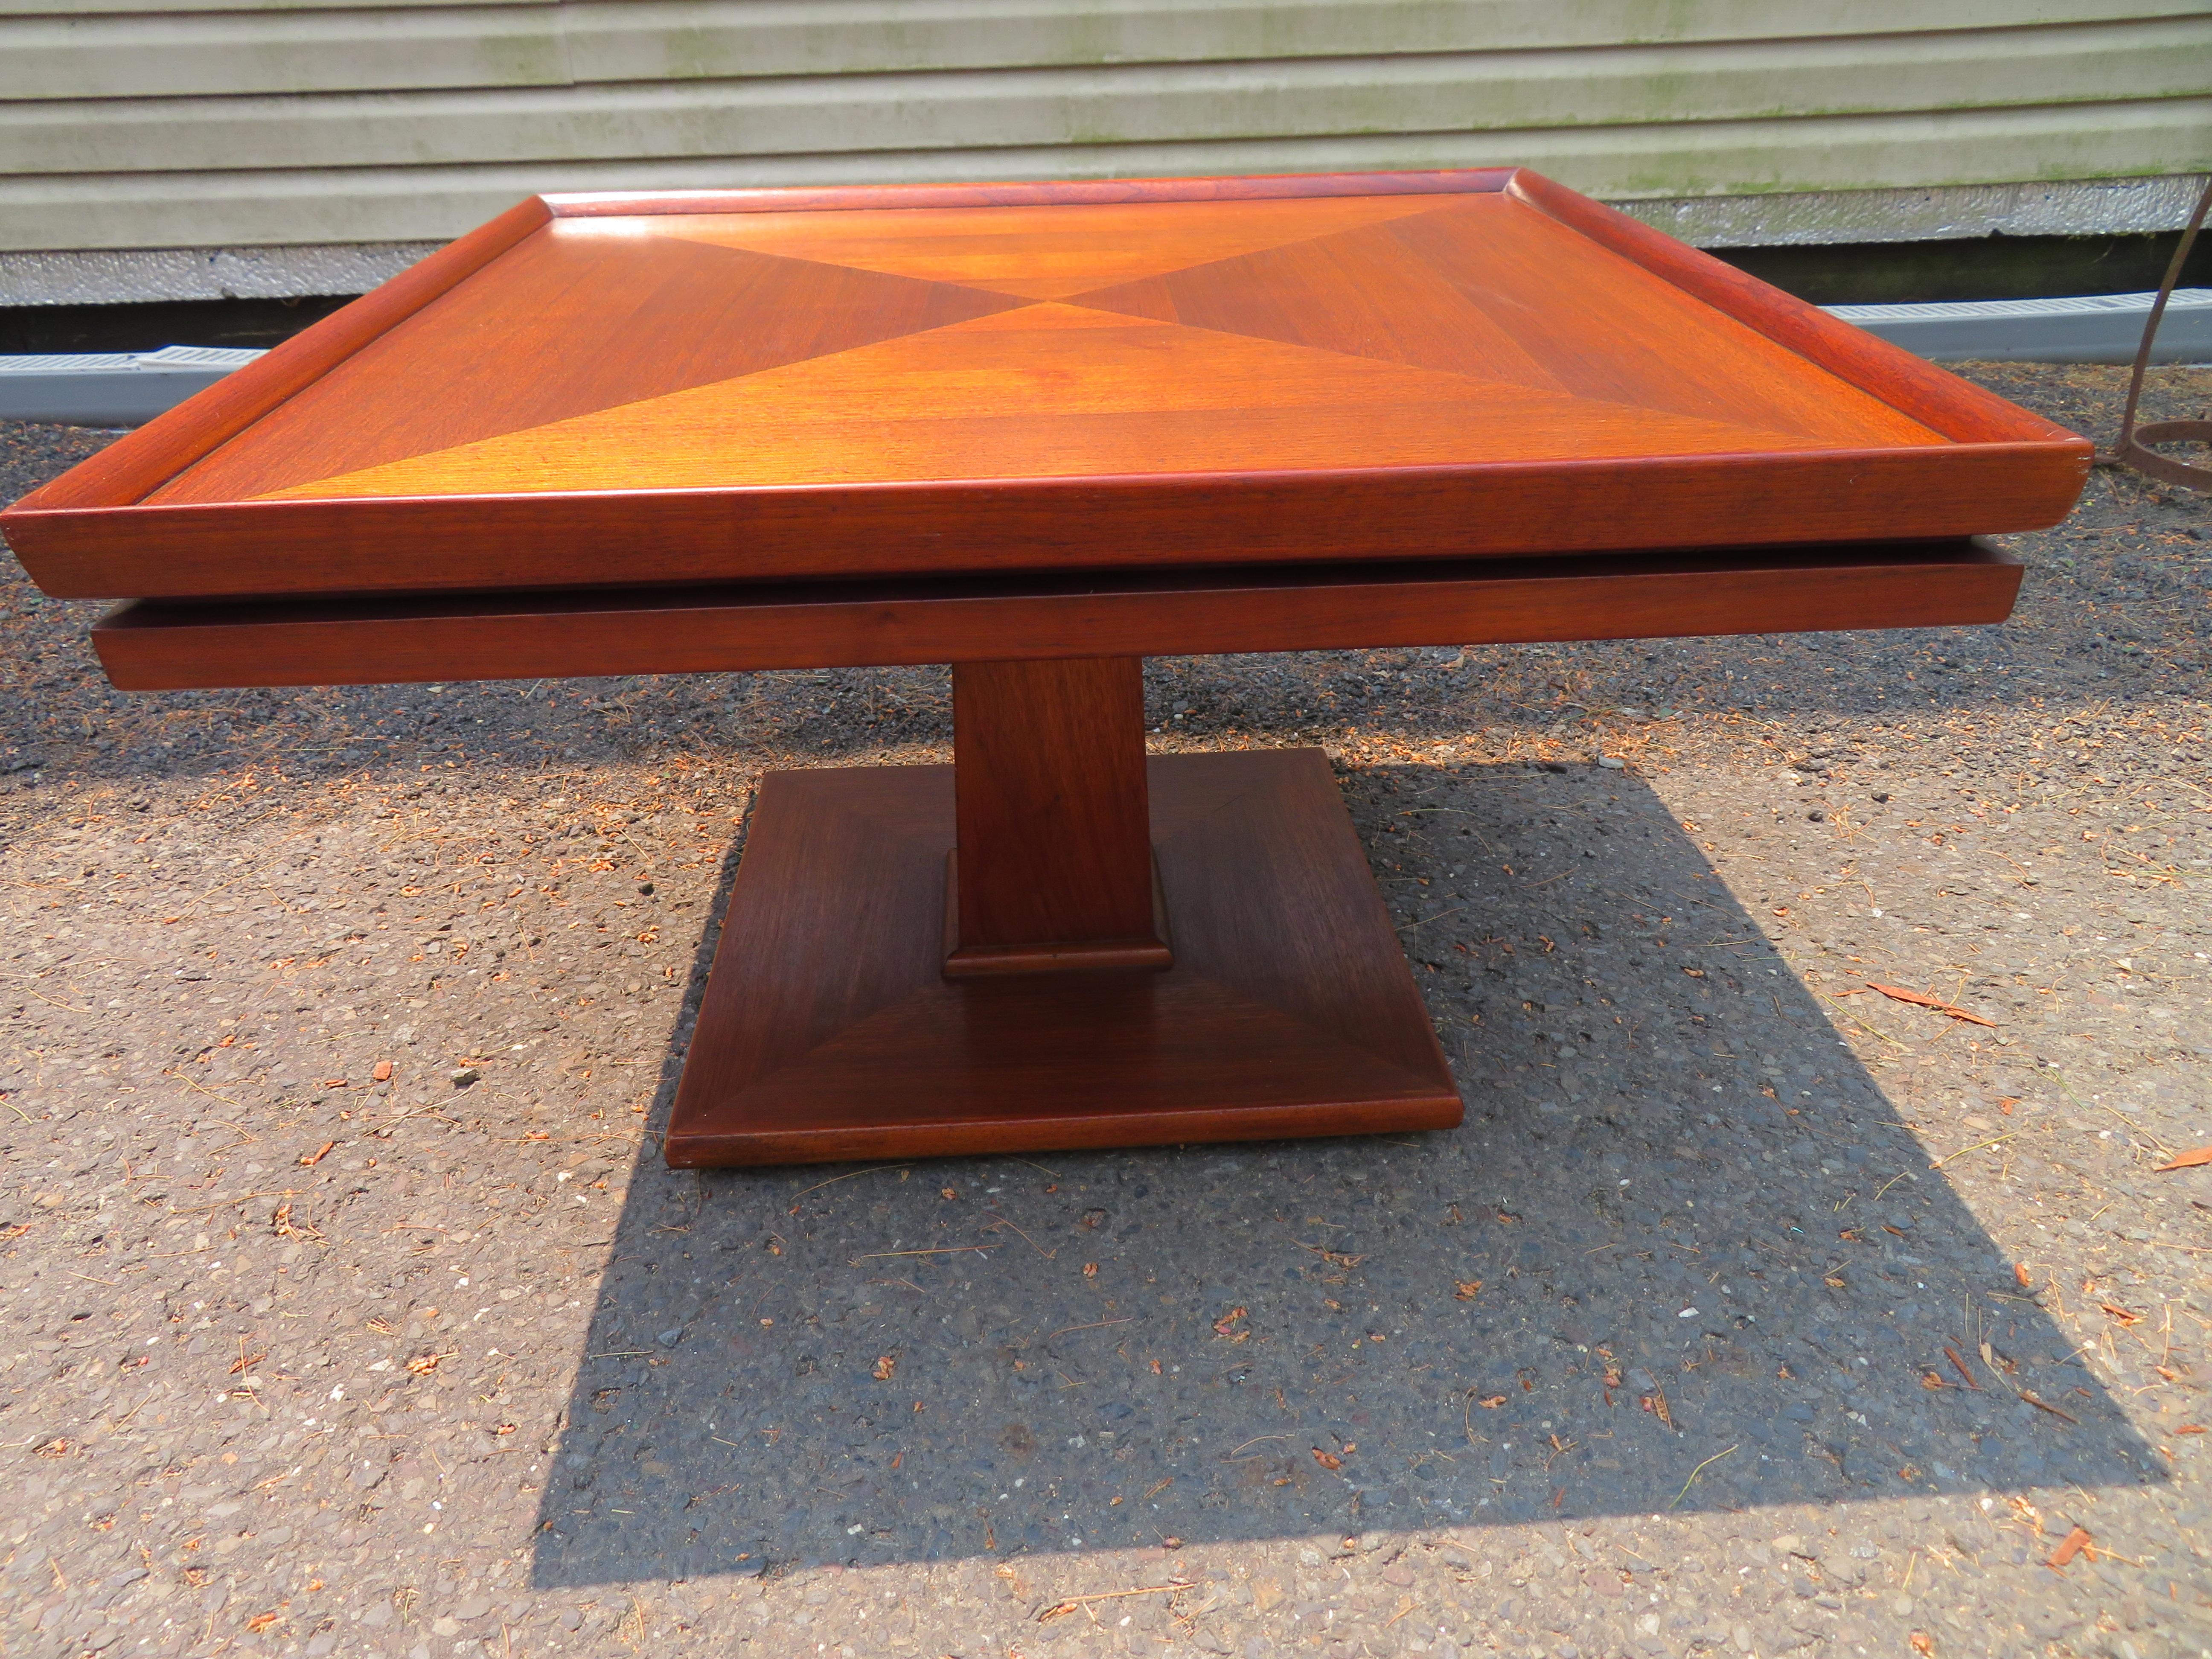 Magnificent square coffee or side table by Widdicomb for John Stuart circa 1950. This fine table is in very nice vintage condition with only light signs of age. It measures 18.5